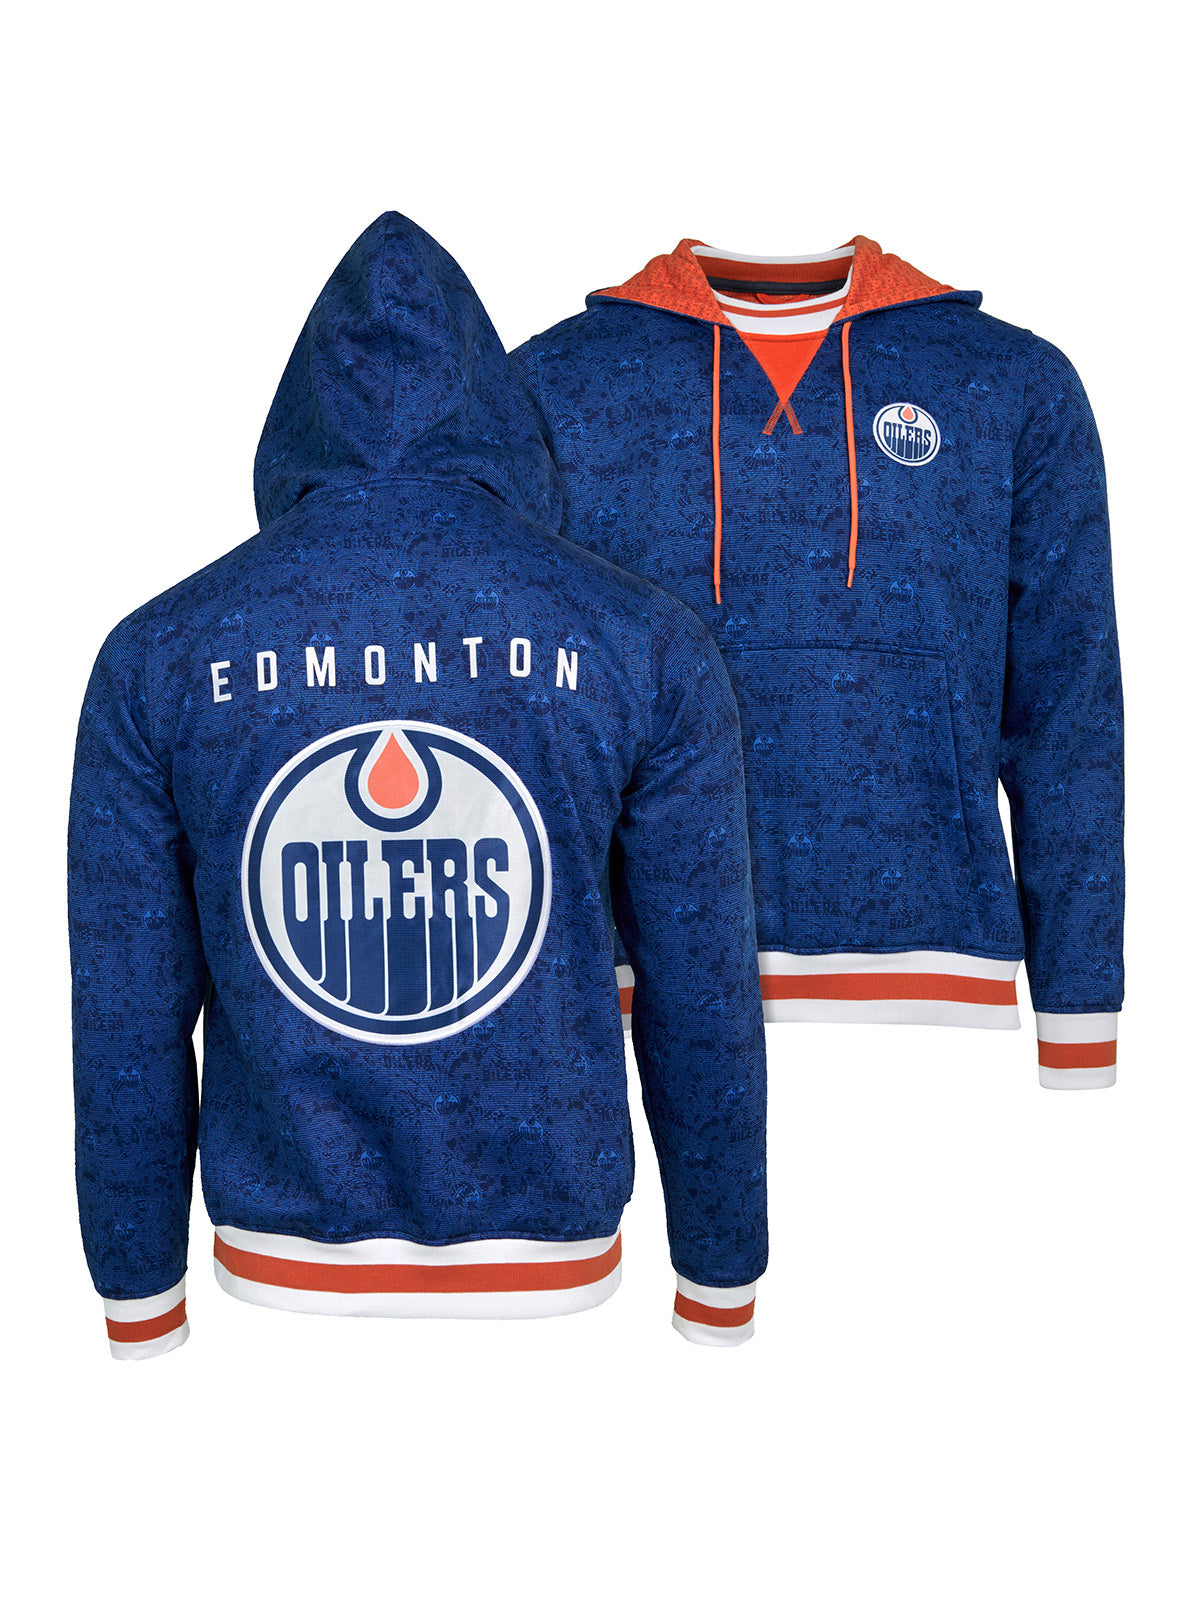 Edmonton Oilers Hoodie - Show your team spirit, with the iconic team logo patch on the front and back, and proudly display your Edmonton Oilers support in their team colors with this NHL hockey hoodie.